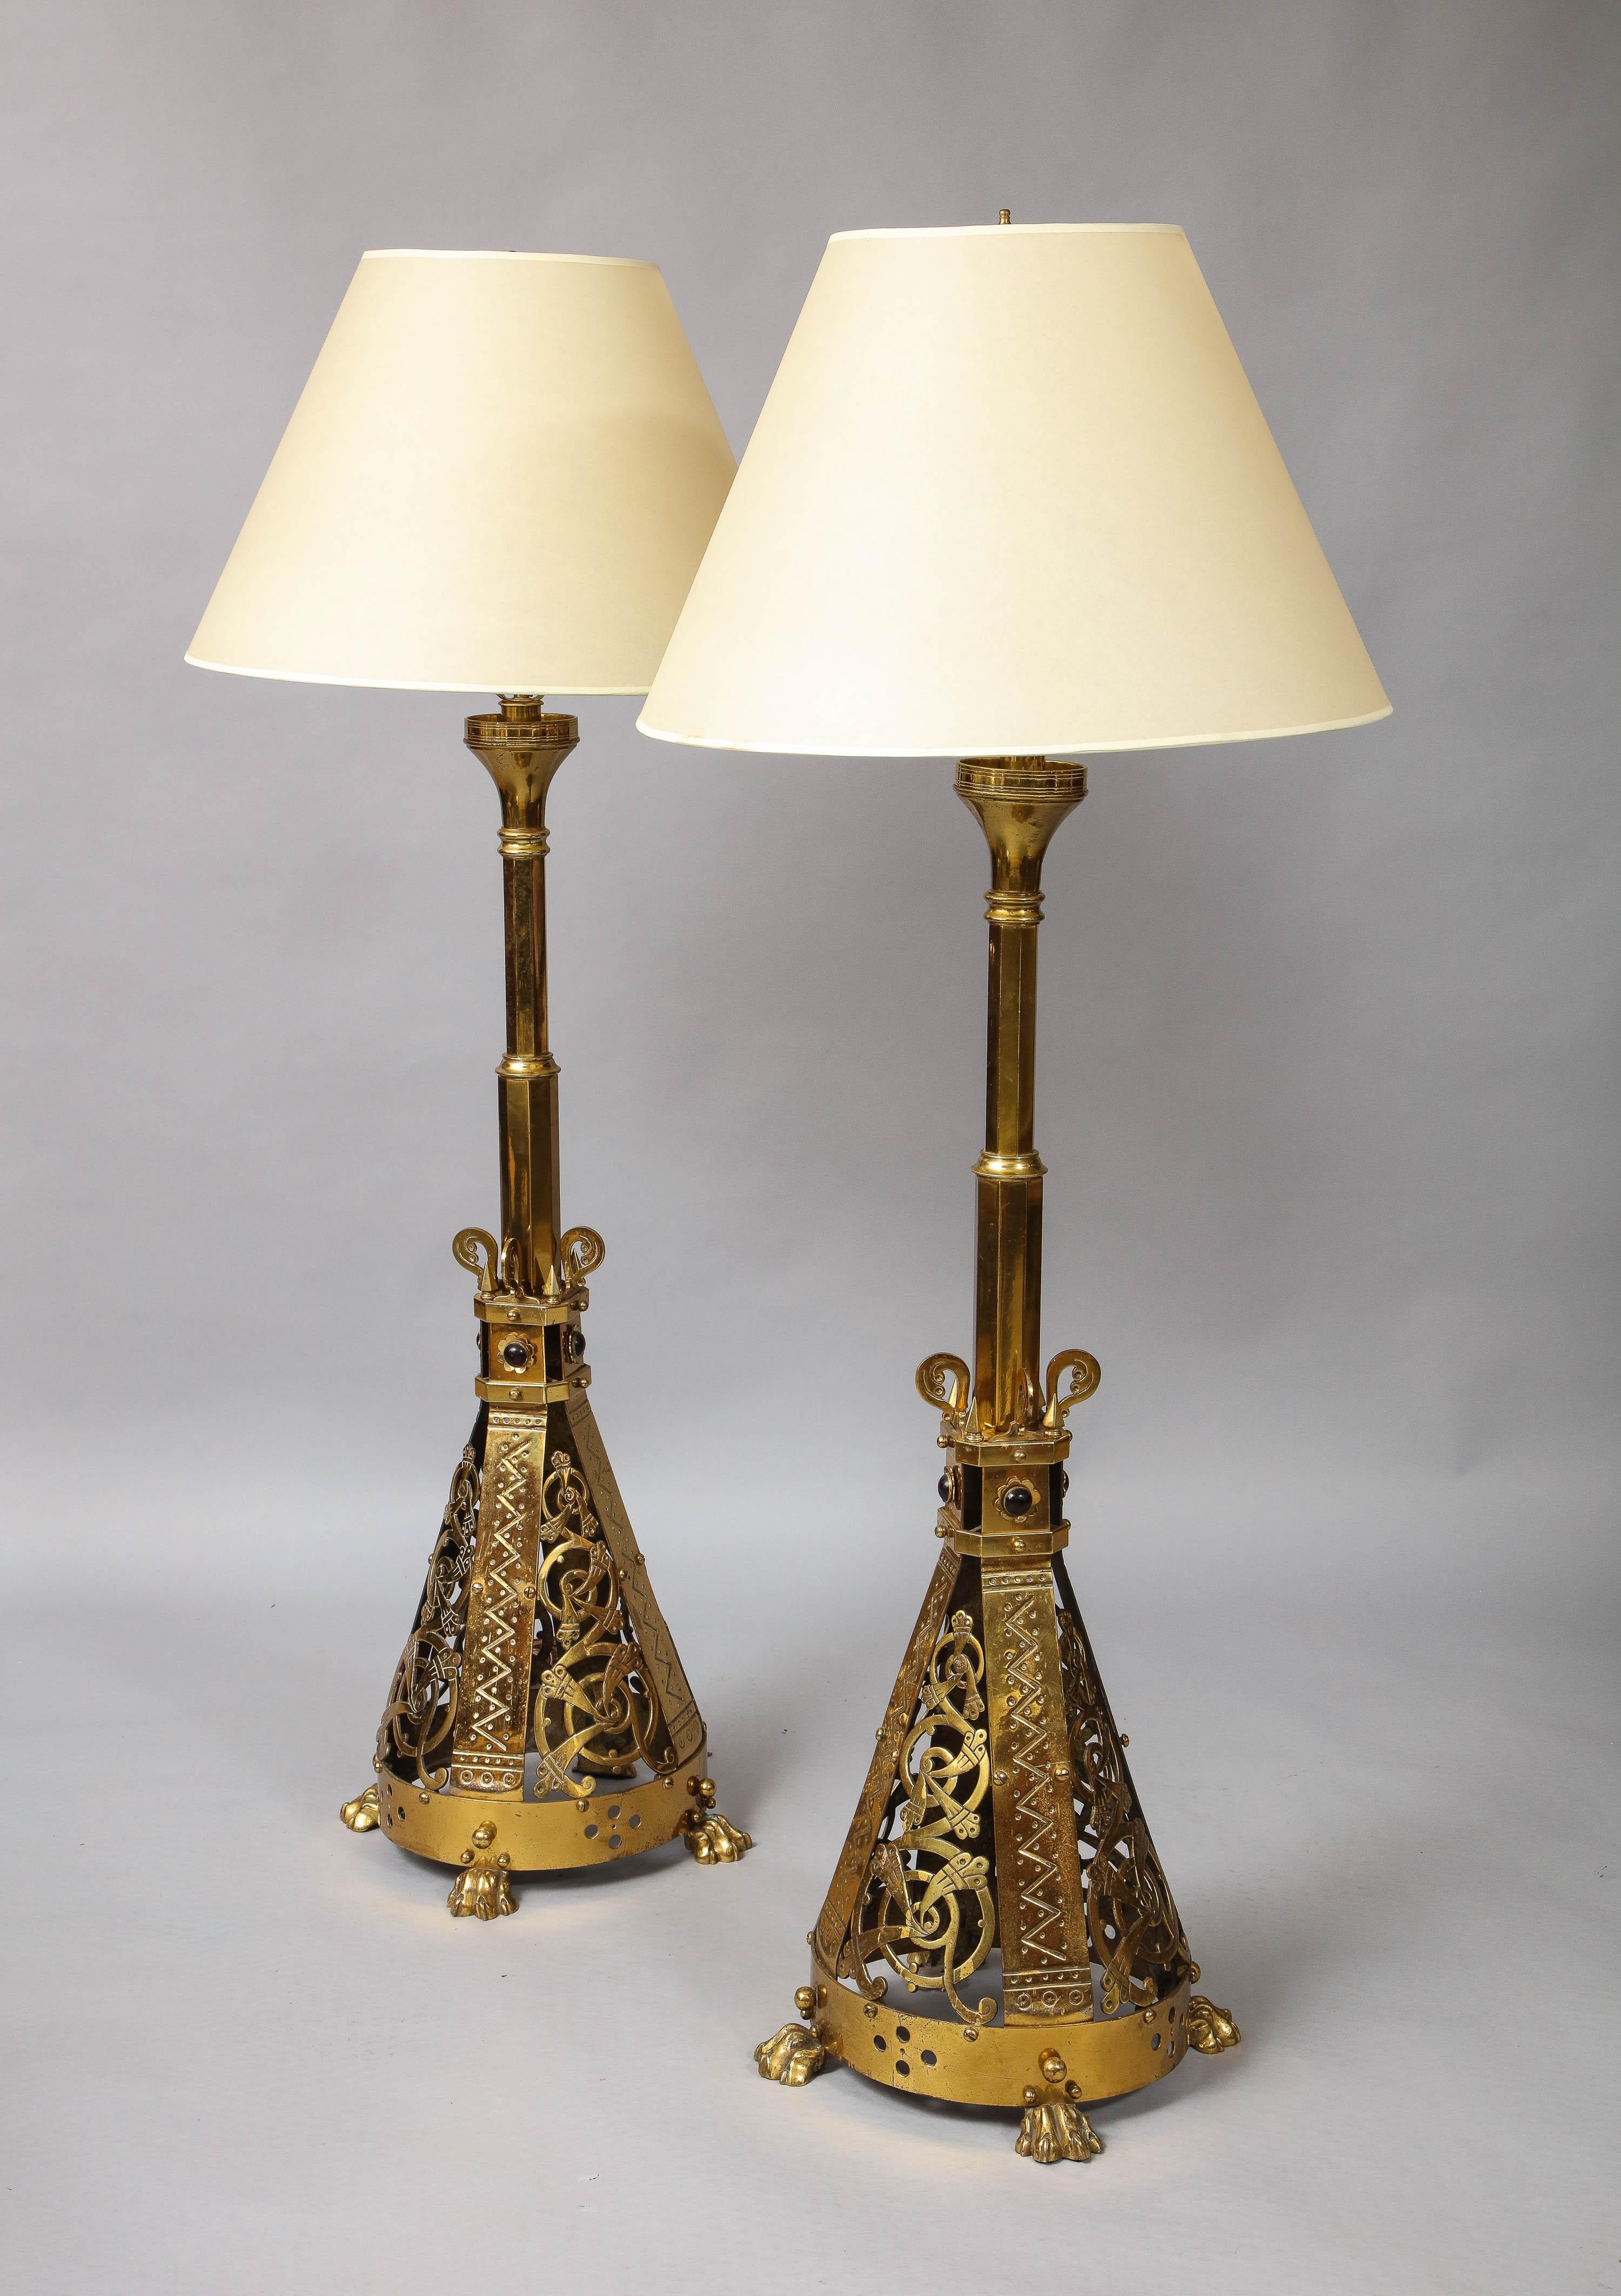 Pair of English Reform Movement Lamps 2